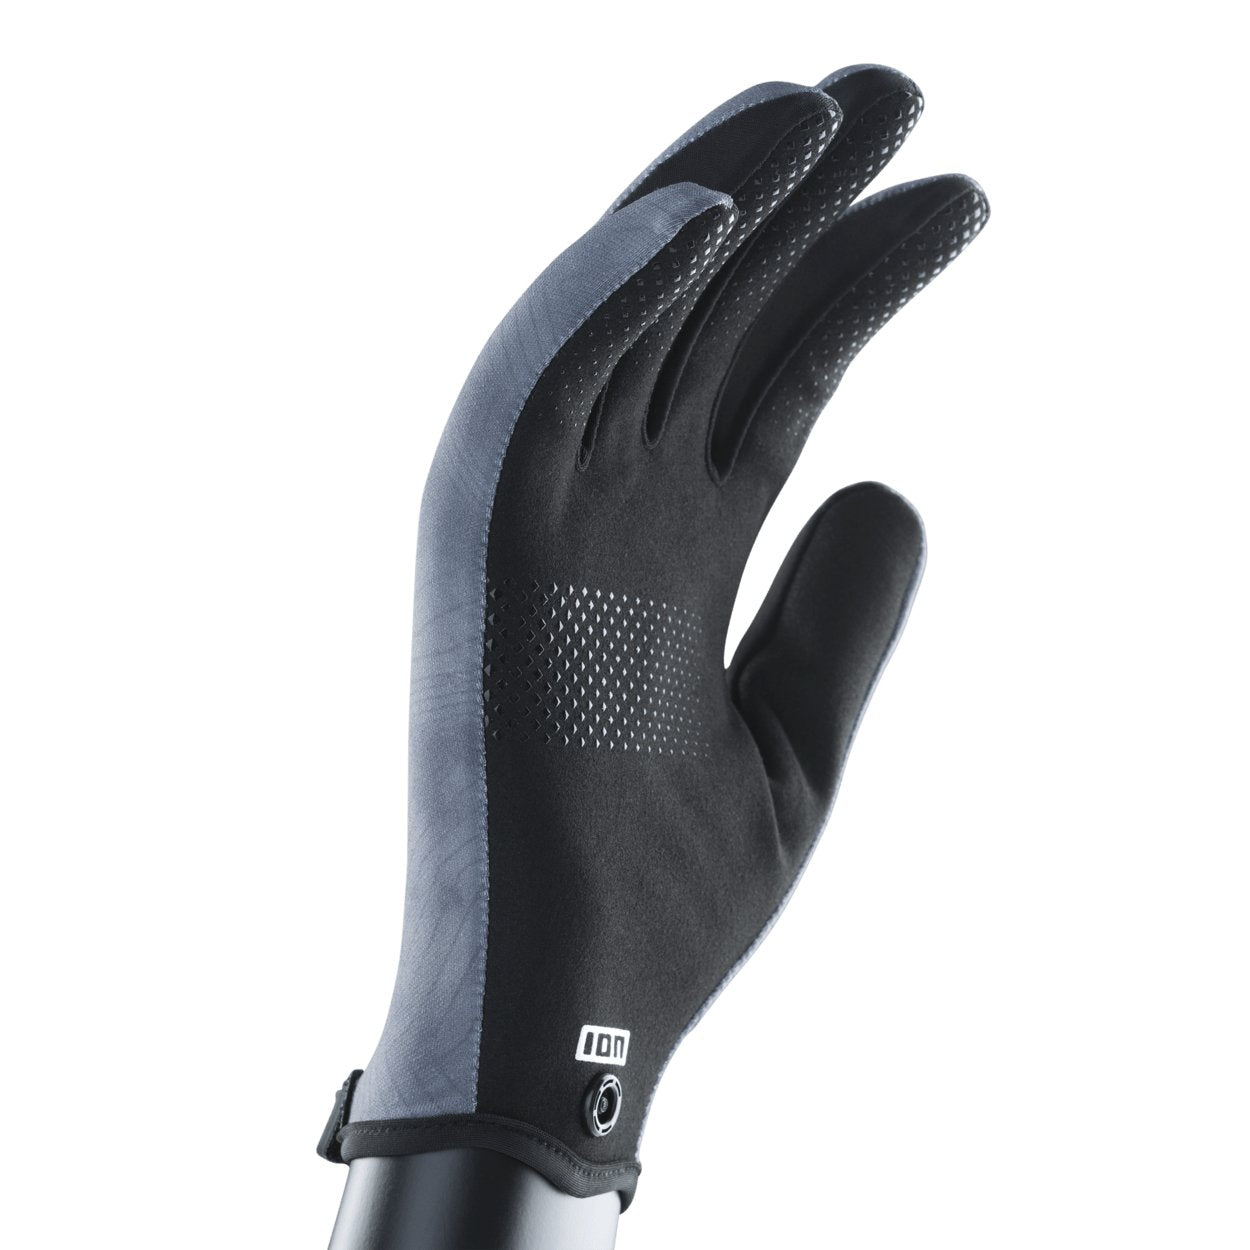 ION Gloves Amara Full Finger unisex 2023 - Worthing Watersports - 9010583128405 - Neo Accessories - ION Water